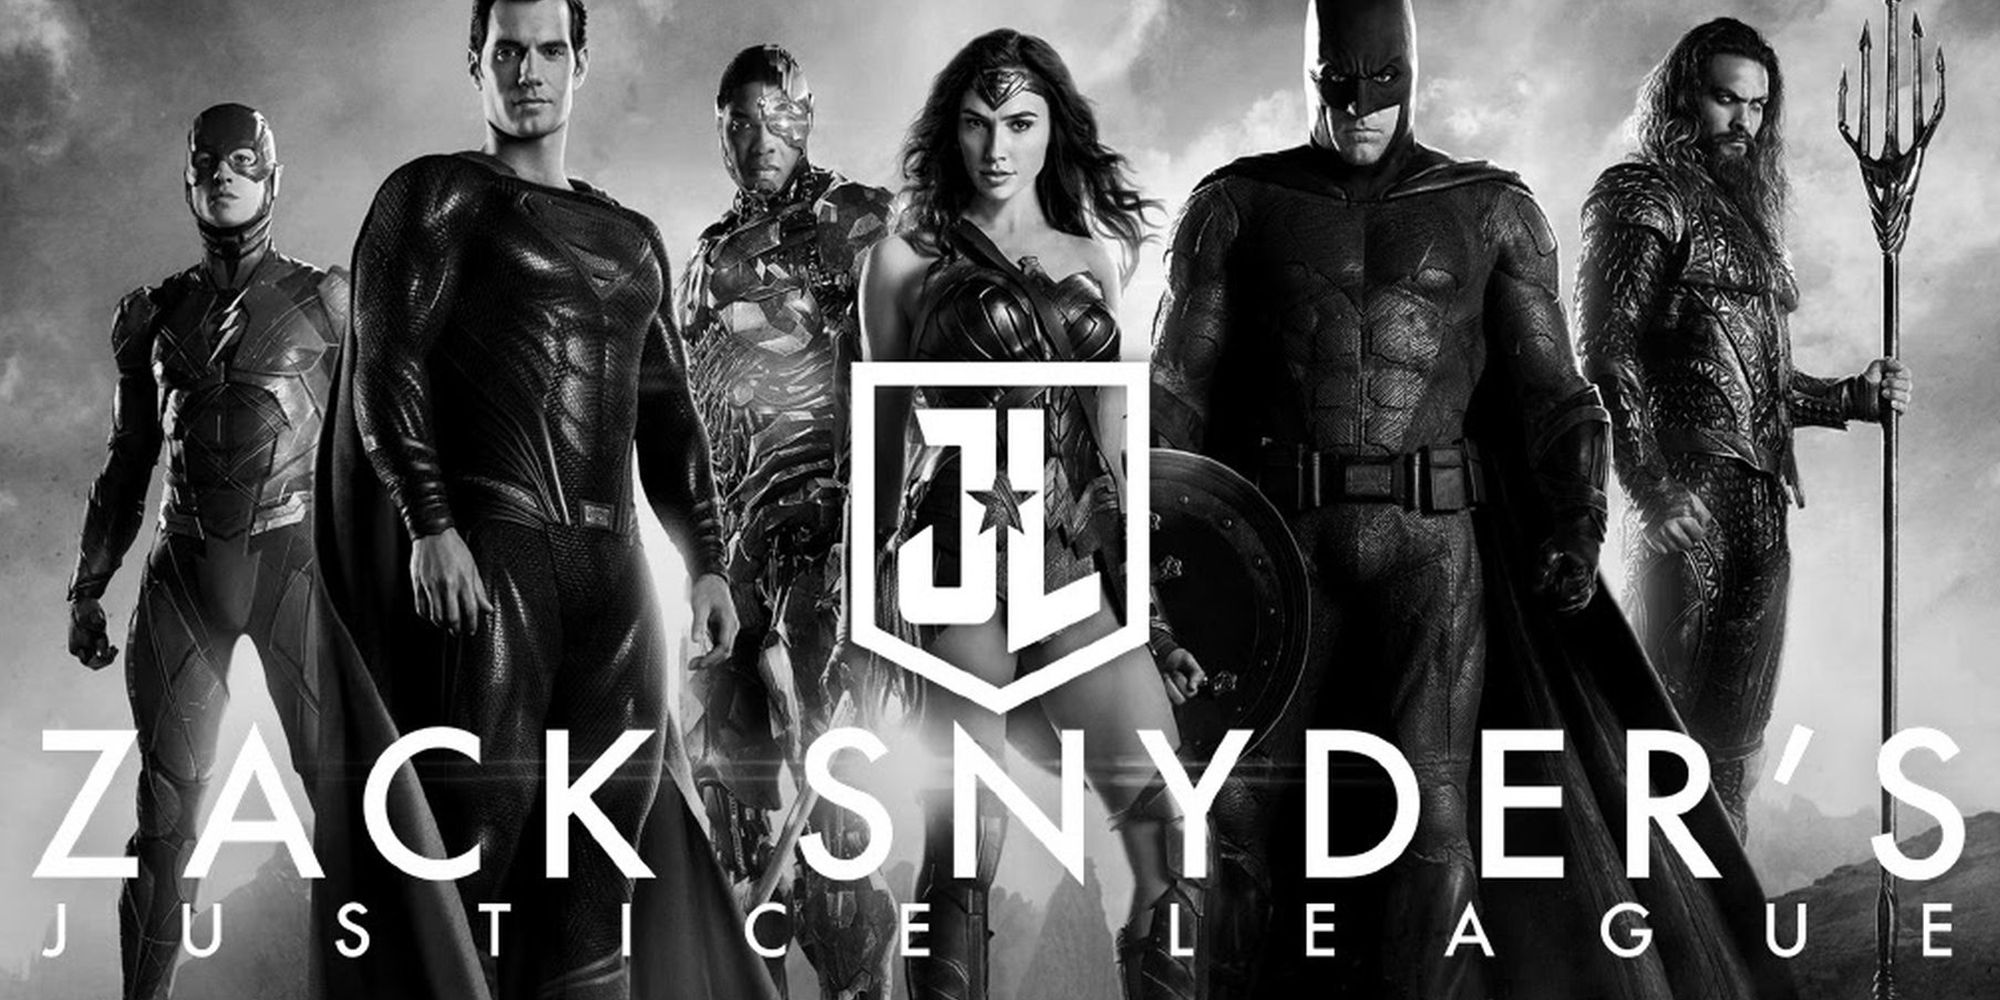 Zack Snyder's Justice League Promotional Image